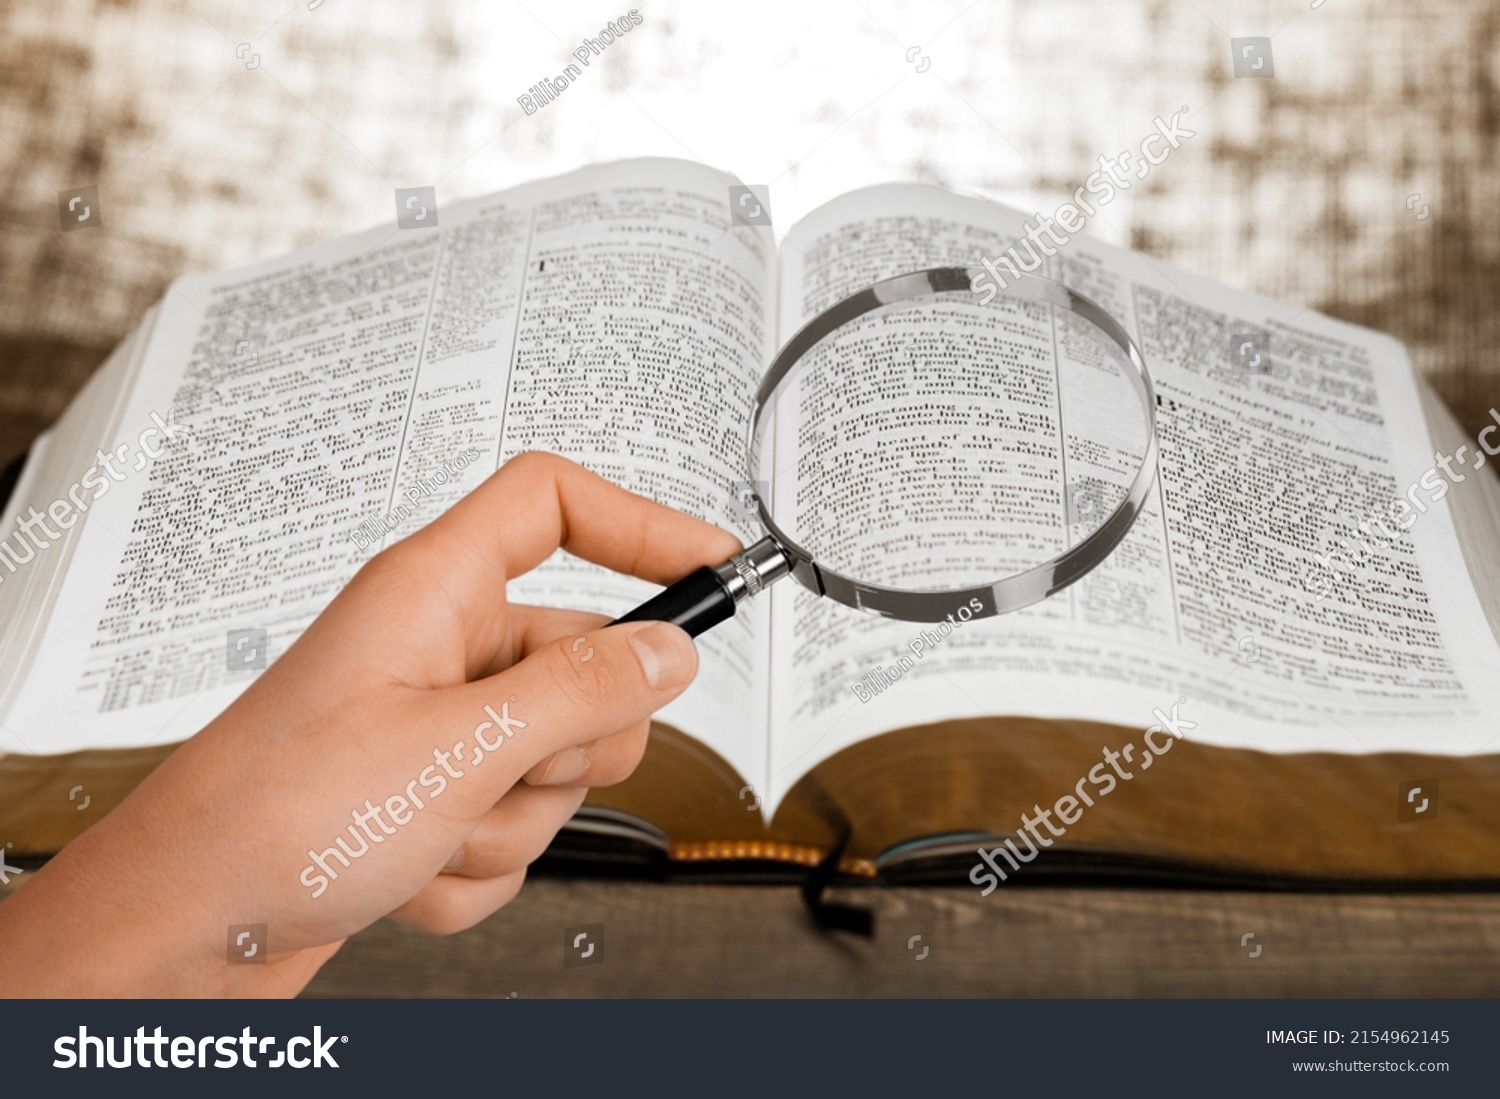 A magnifying glass in hand with open bible book. #2154962145